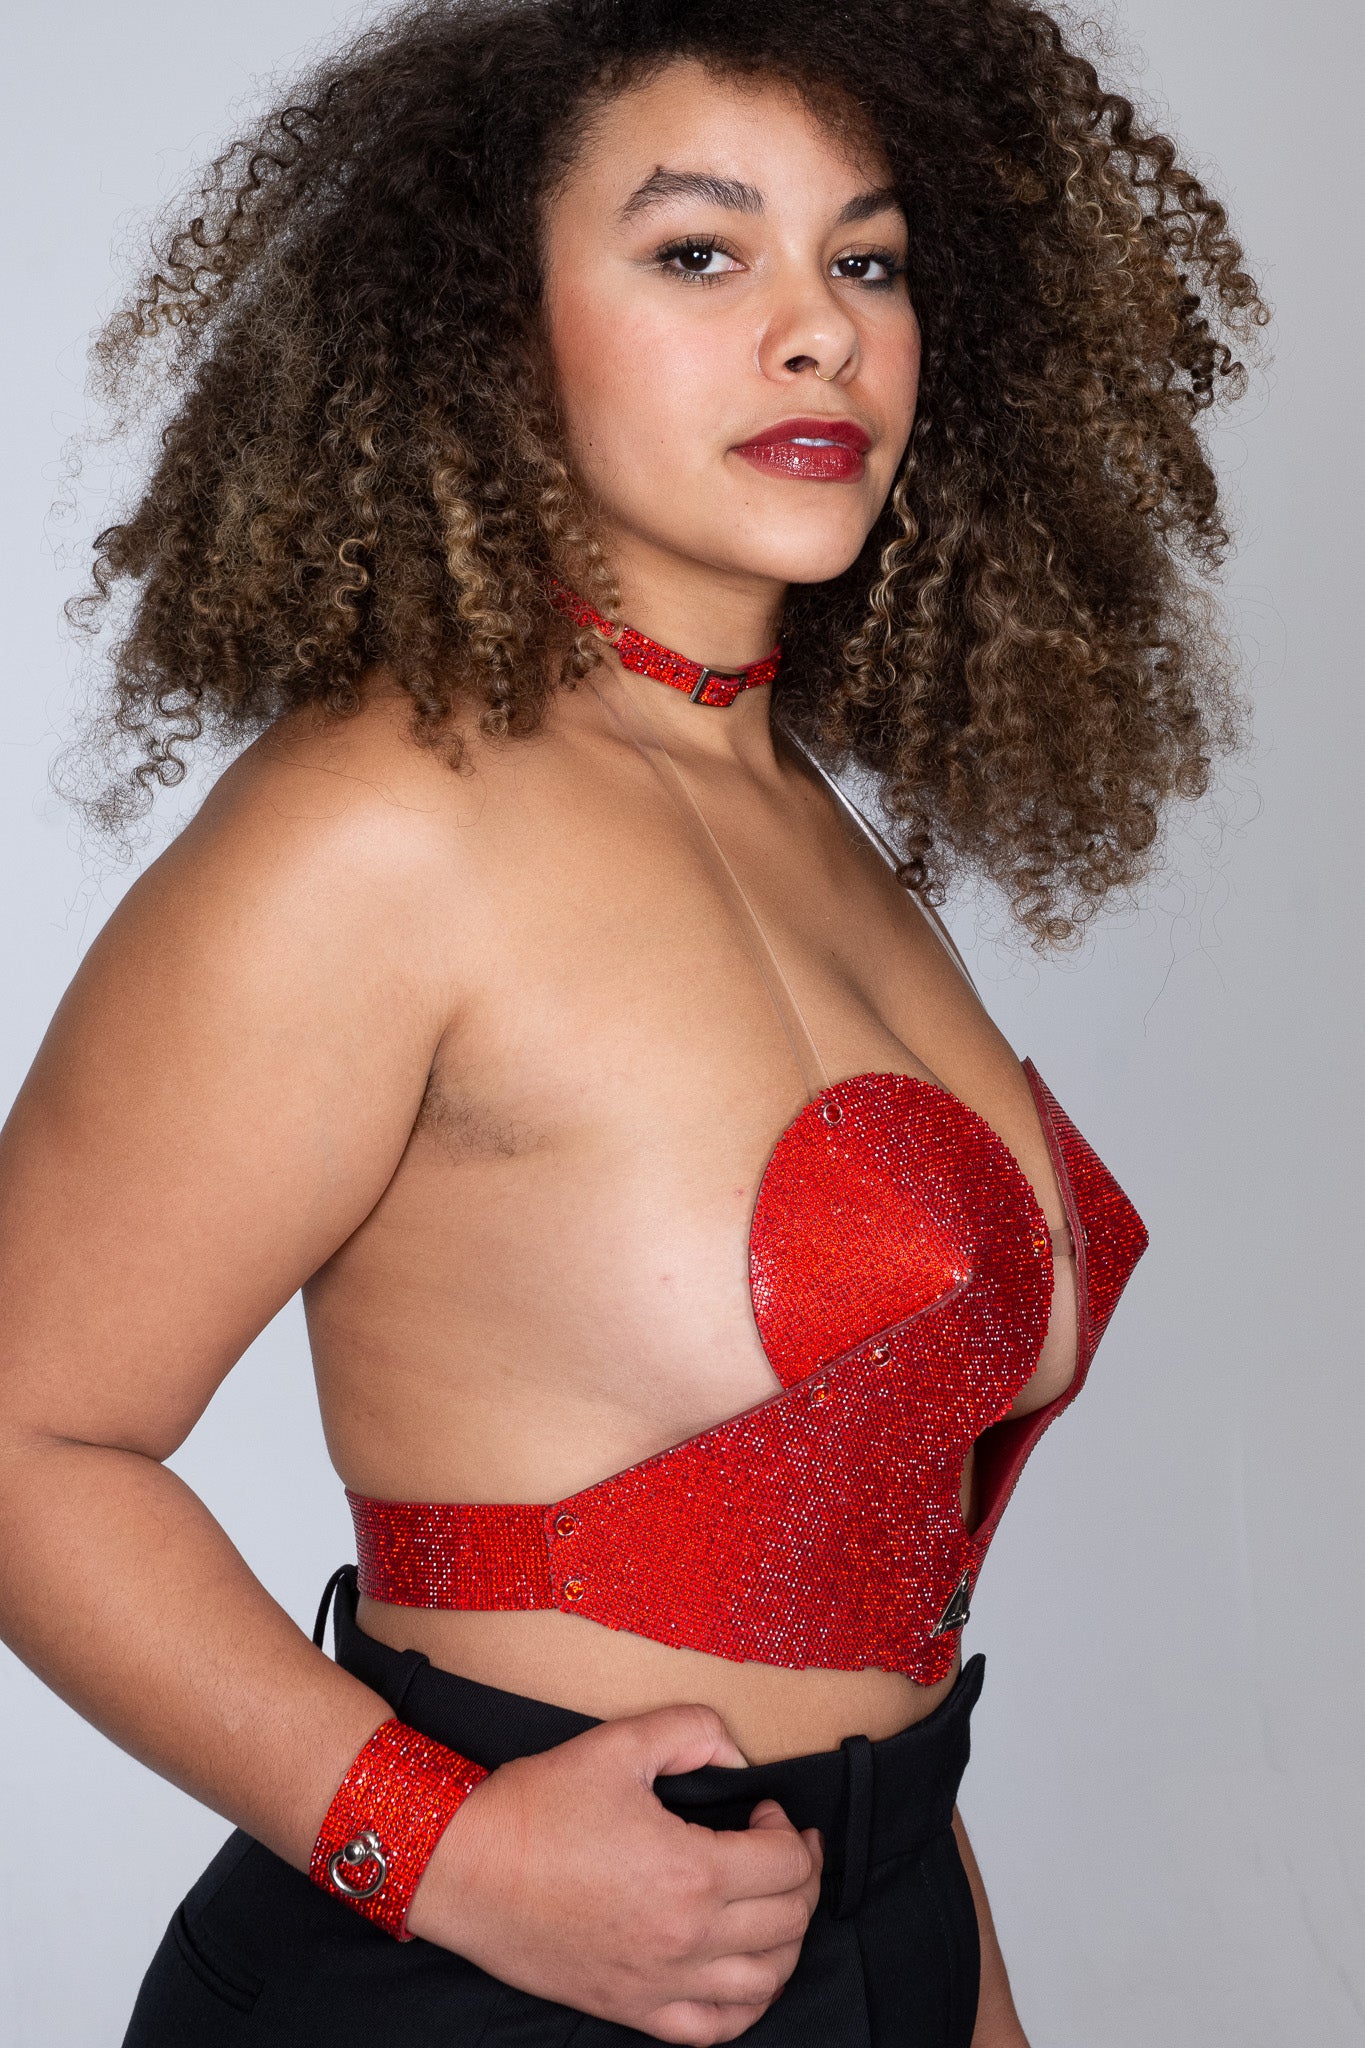 Stylish red MIKEY Bra with a fashionable graphic design for a bold statement